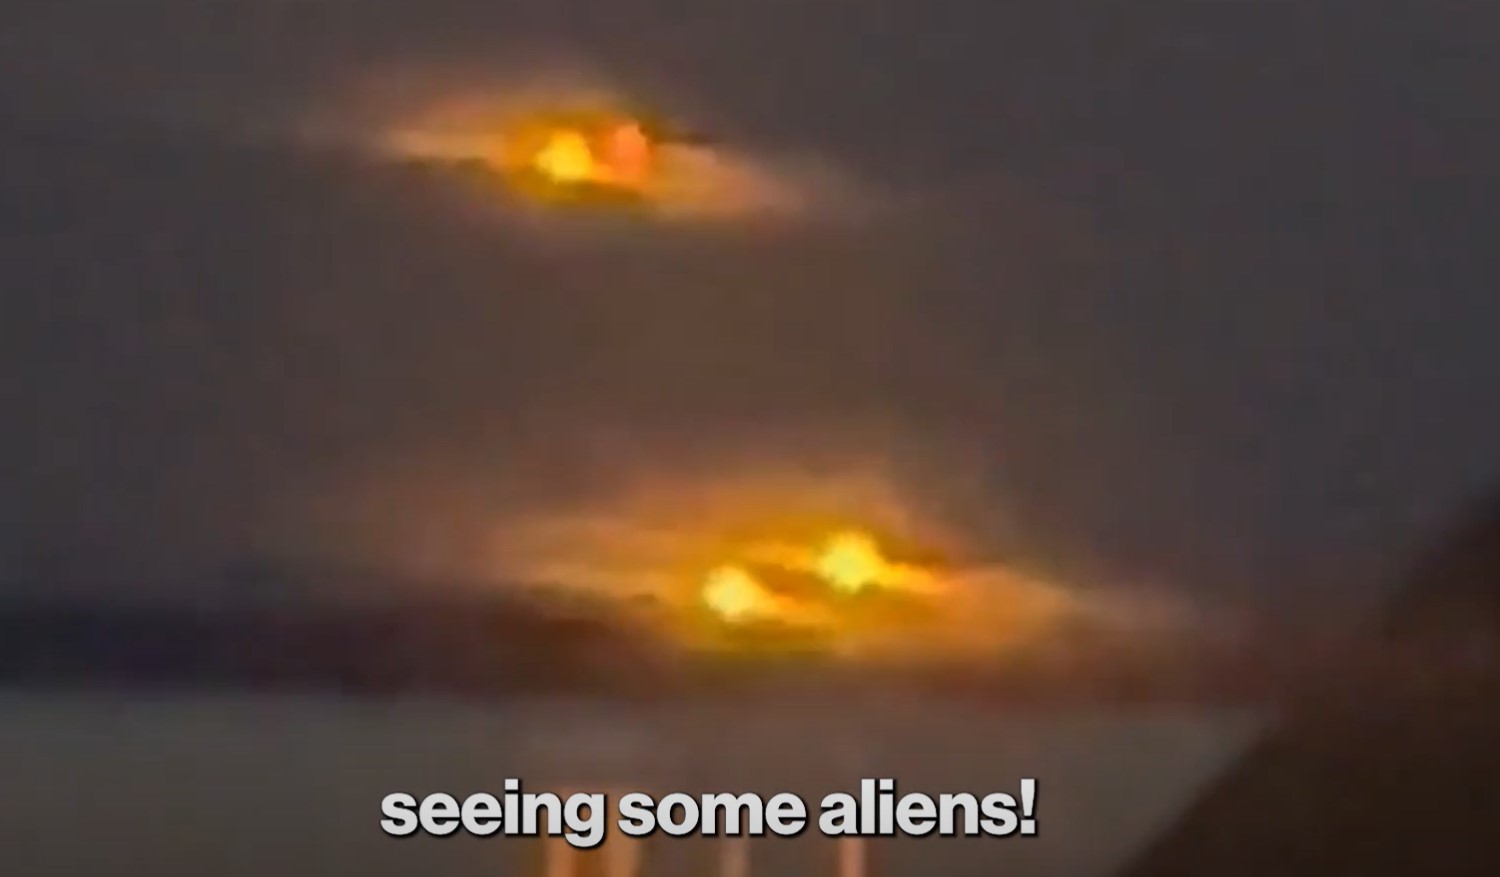 Couple spots mysterious ball-shaped objects which are supposed to be UFOs in the sky 2